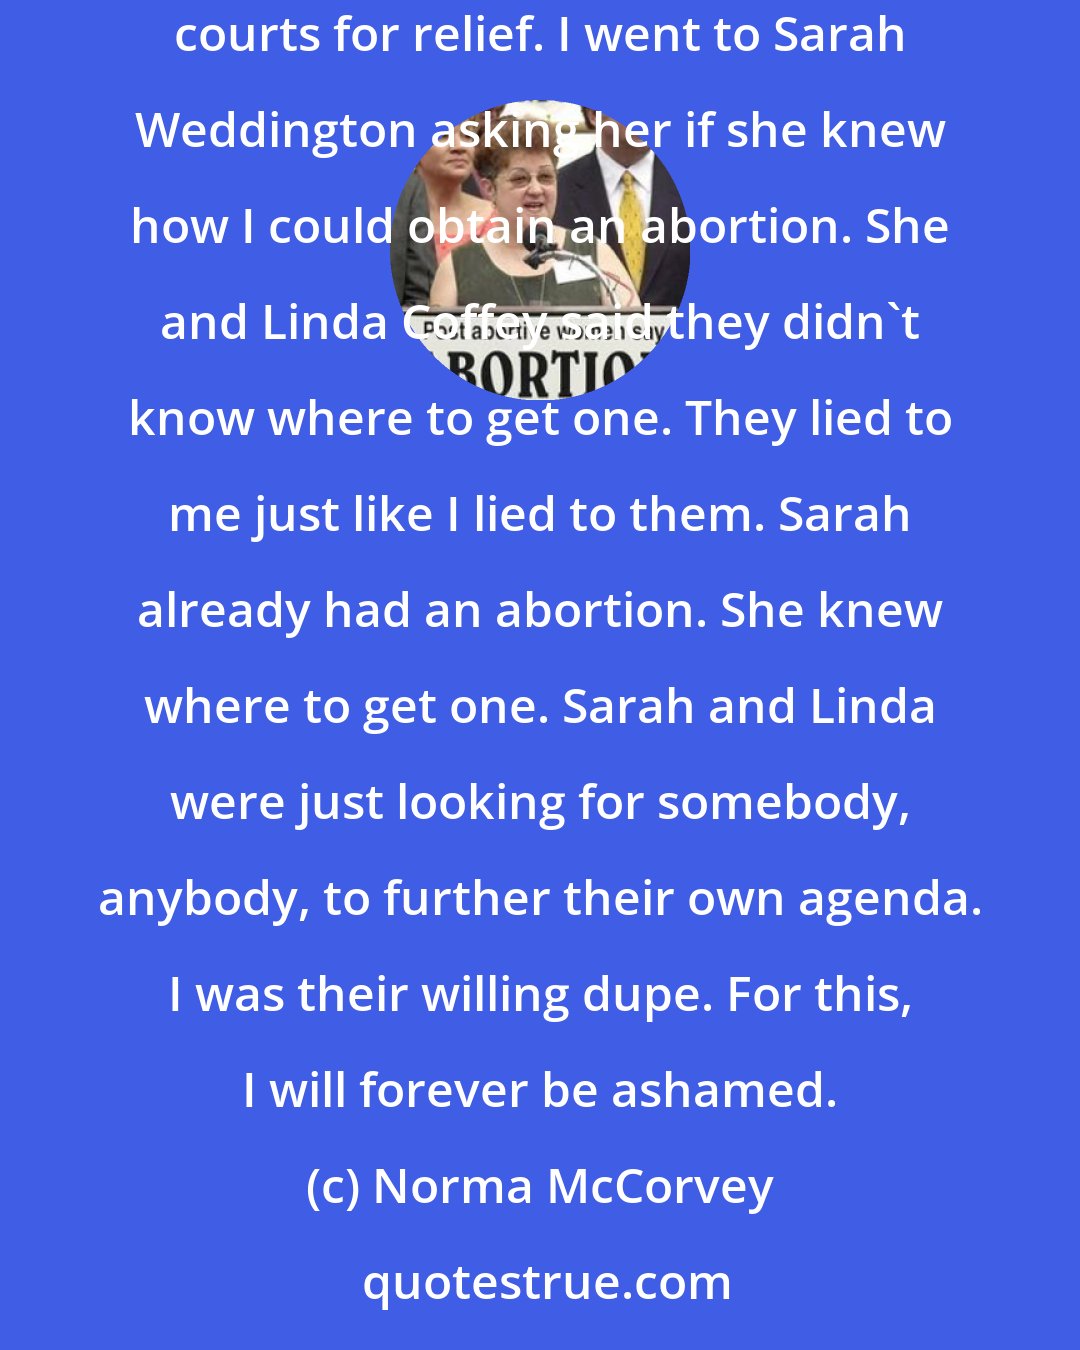 Norma McCorvey: I did not go to the Supreme Court on behalf of a class of women. I wasn't pursuing any legal remedy to my unwanted pregnancy. I did not go to the federal courts for relief. I went to Sarah Weddington asking her if she knew how I could obtain an abortion. She and Linda Coffey said they didn't know where to get one. They lied to me just like I lied to them. Sarah already had an abortion. She knew where to get one. Sarah and Linda were just looking for somebody, anybody, to further their own agenda. I was their willing dupe. For this, I will forever be ashamed.